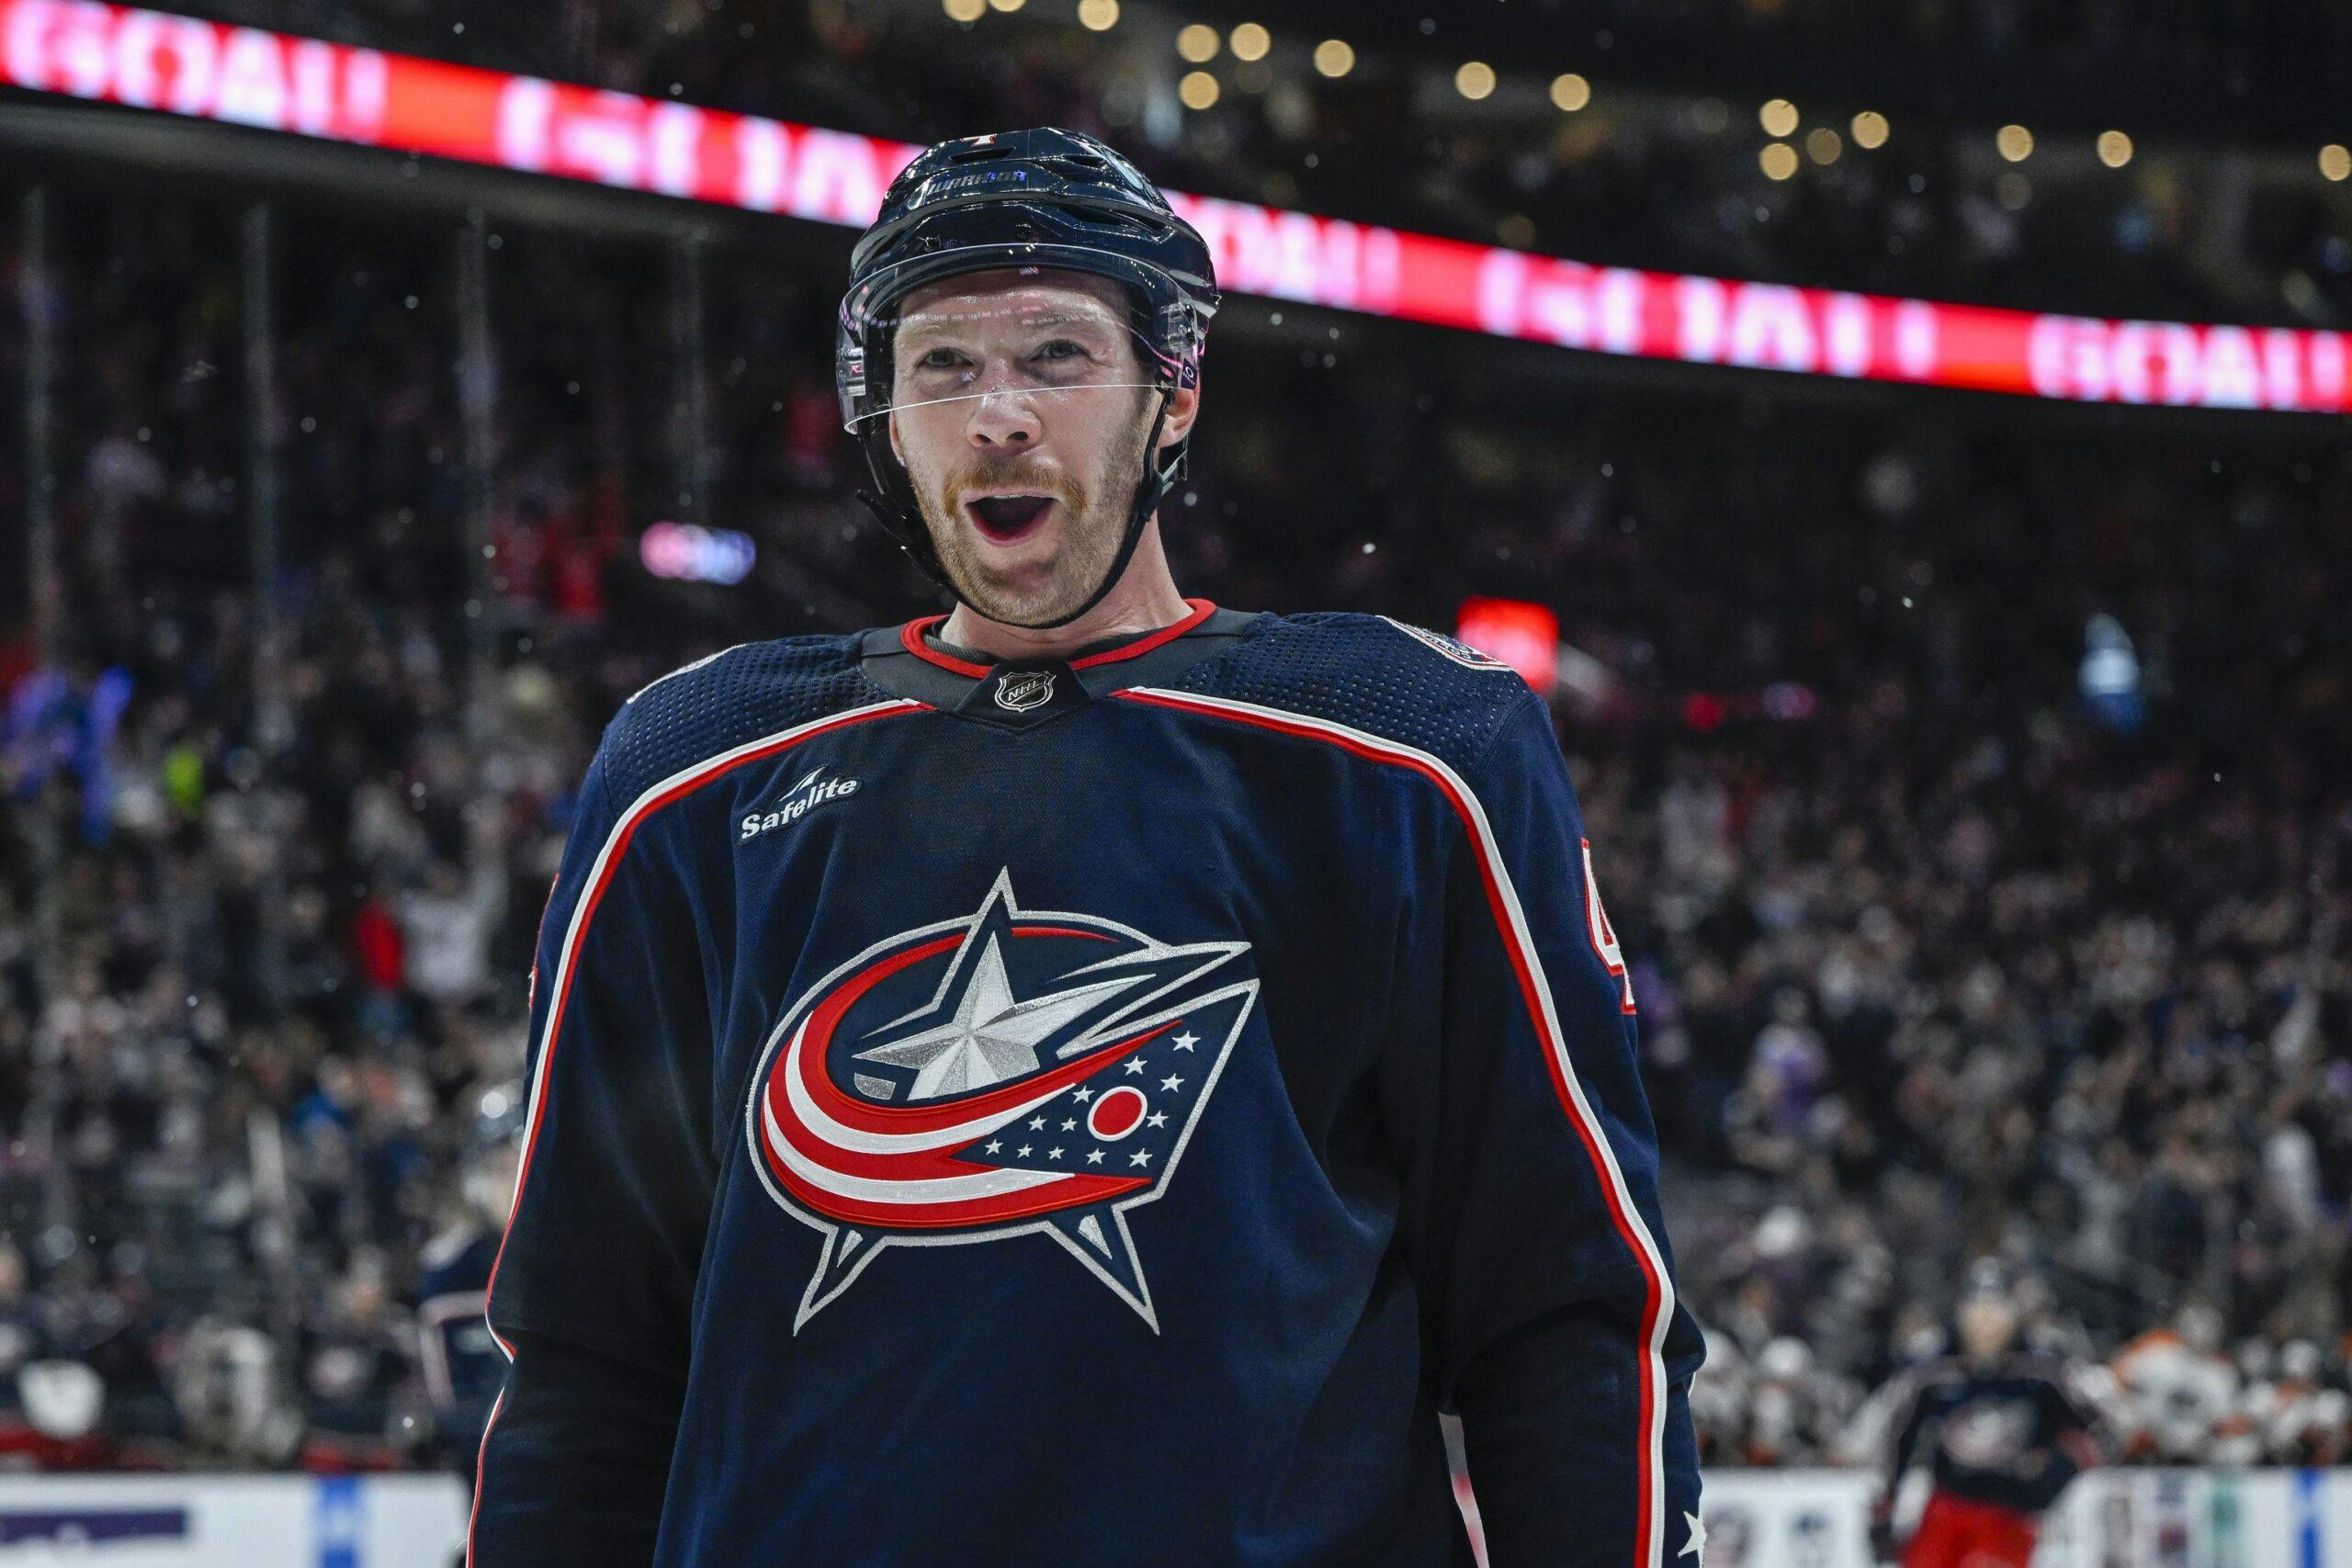 Columbus Blue Jackets to host Tampa Bay Lightning in home opener